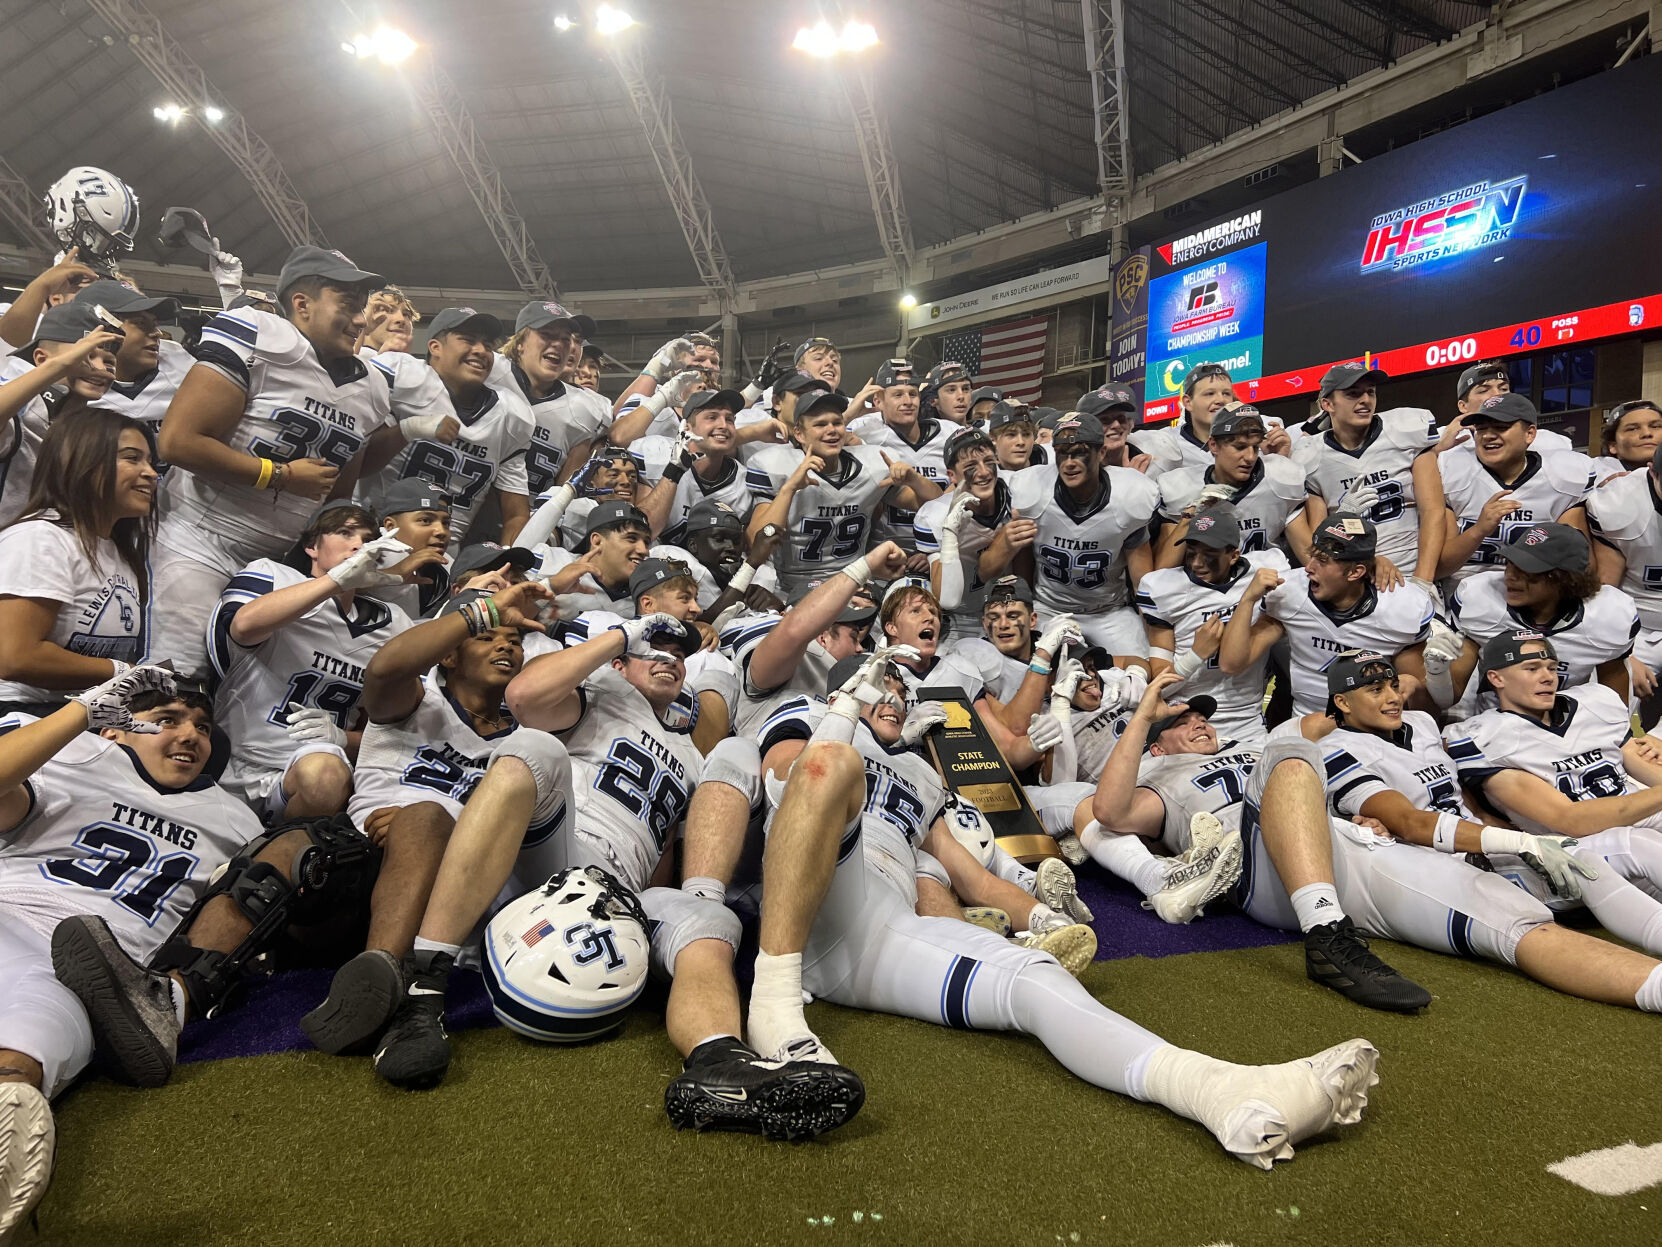 Lewis Central Wins Second State Title with Dominant 40-21 Victory in Football Championships